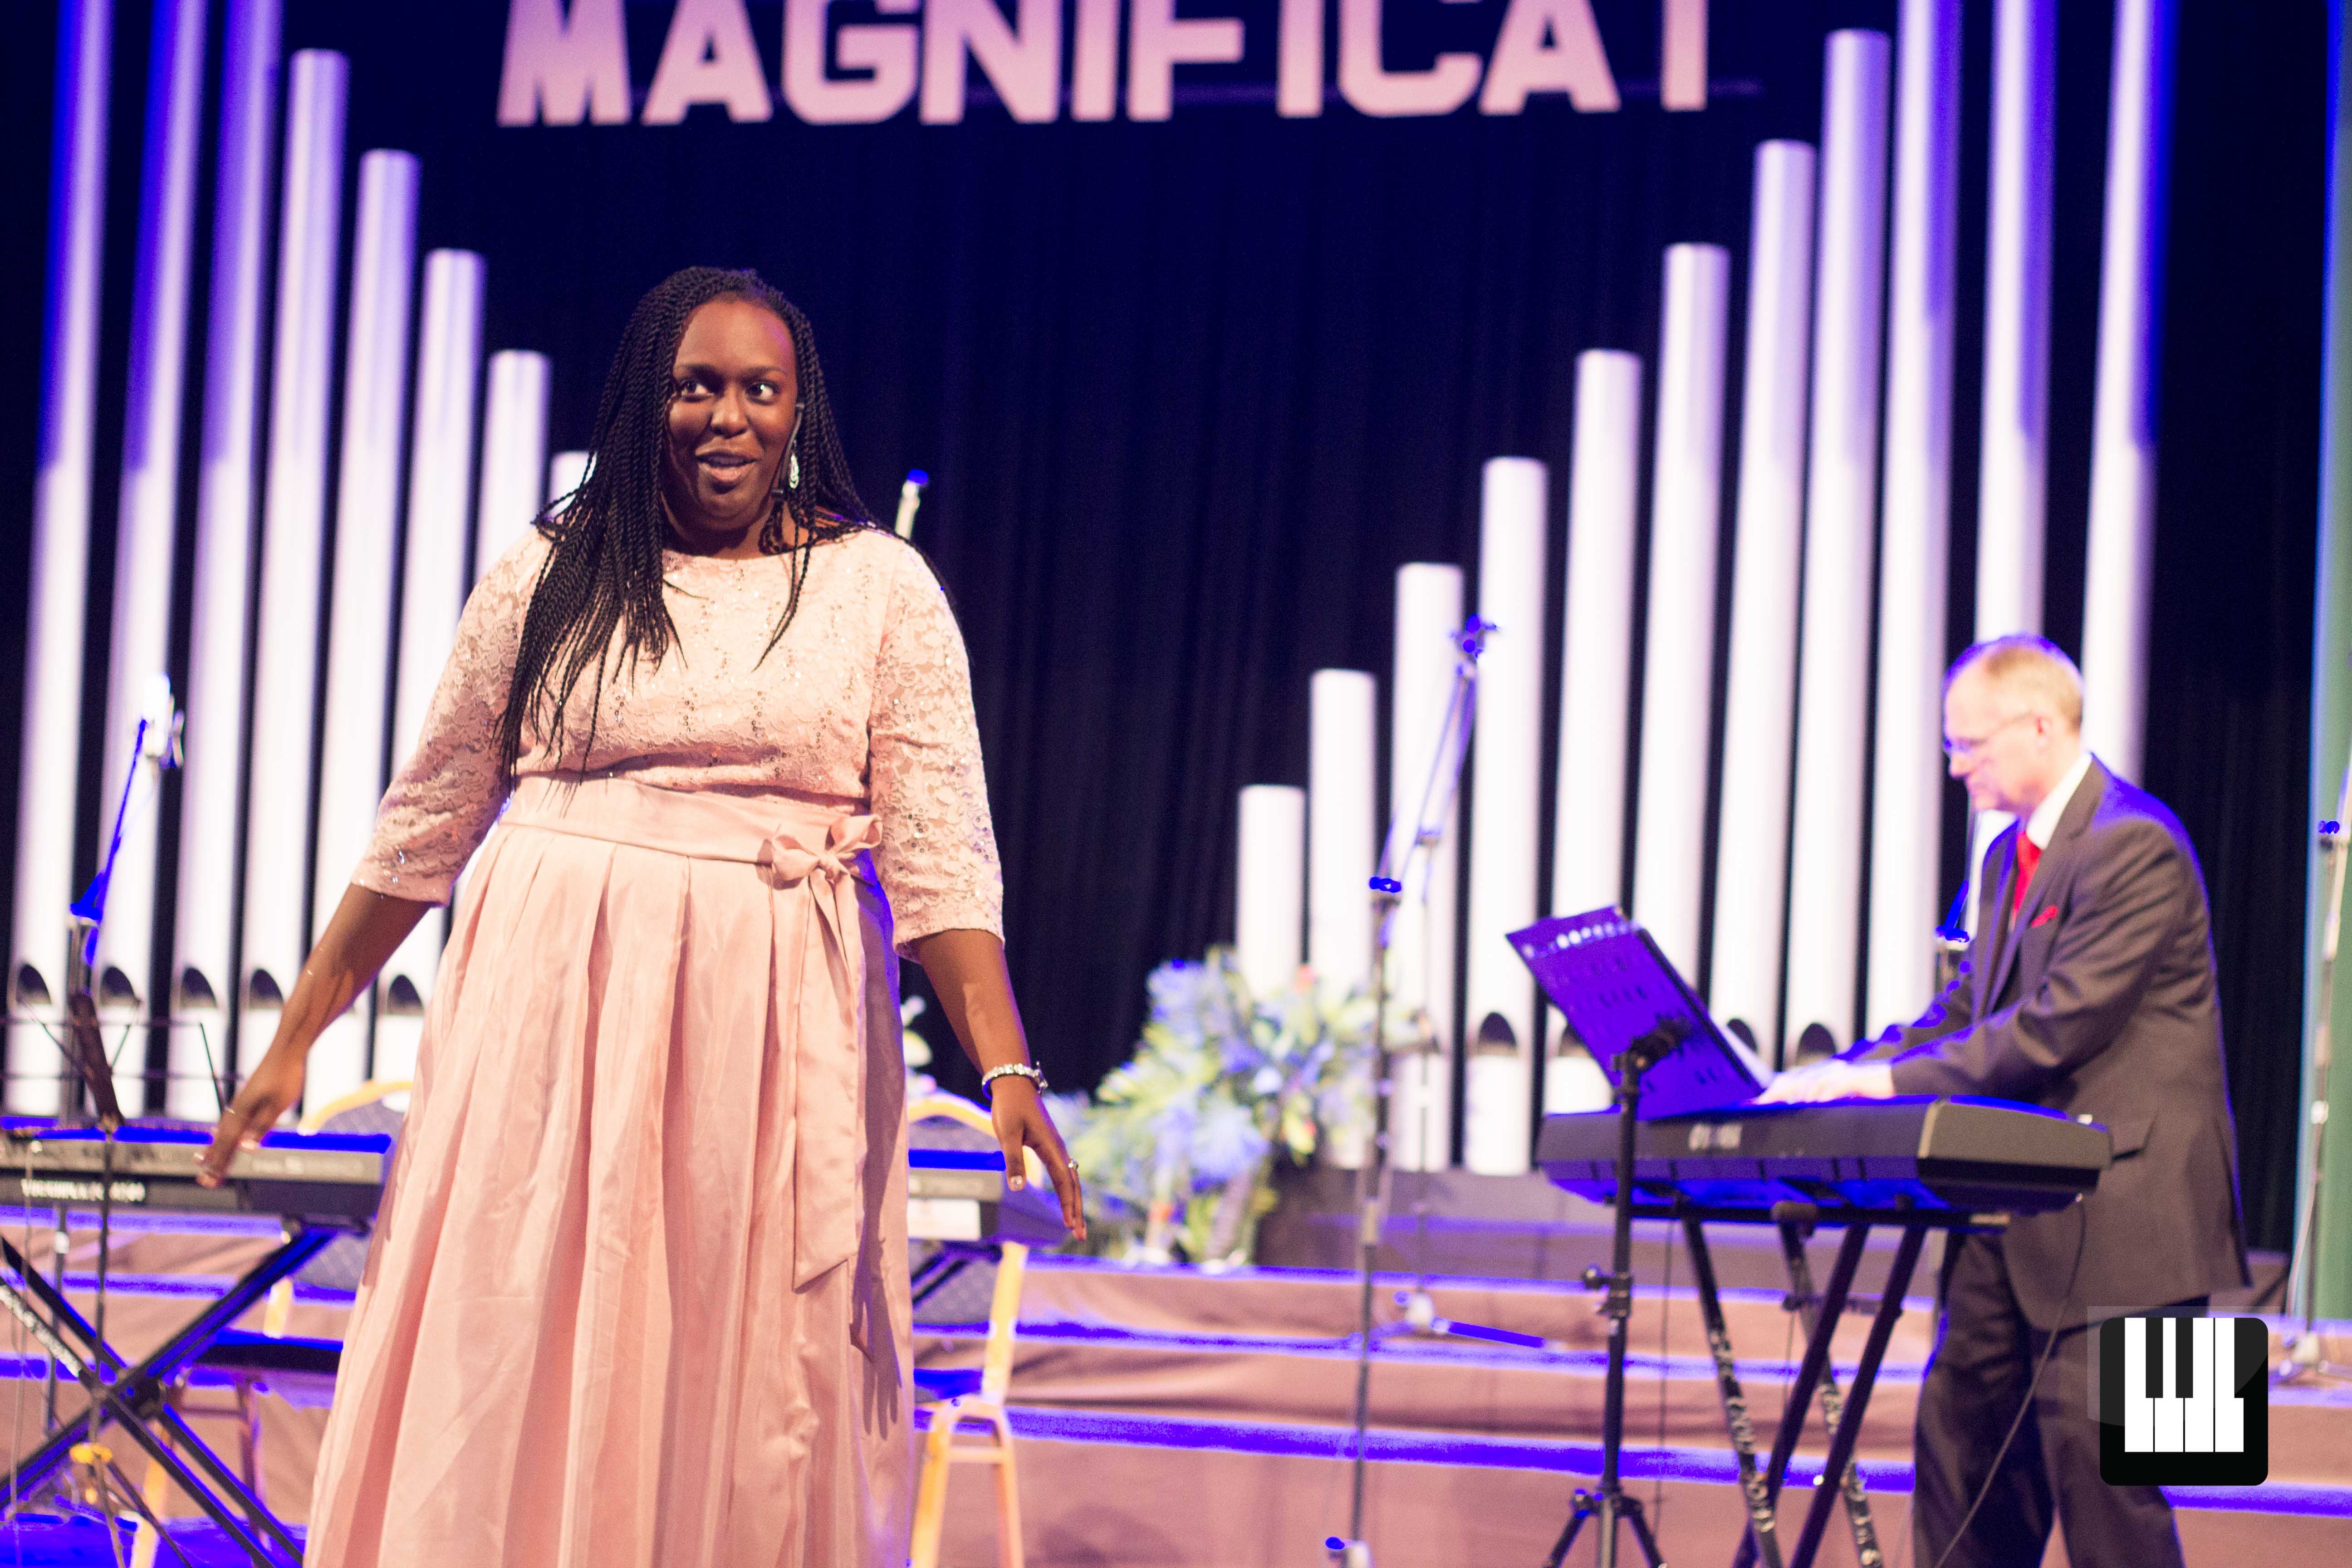 'Magnificat', with Celestial Evangel and Gramophone Chorus Jesse Johnson joined hundreds of Ghanaian choral music fans at the much anticipated 'Magnificat' concert, a collaborative effort between Gramophone Ghana and Celestial Evangel Choir.